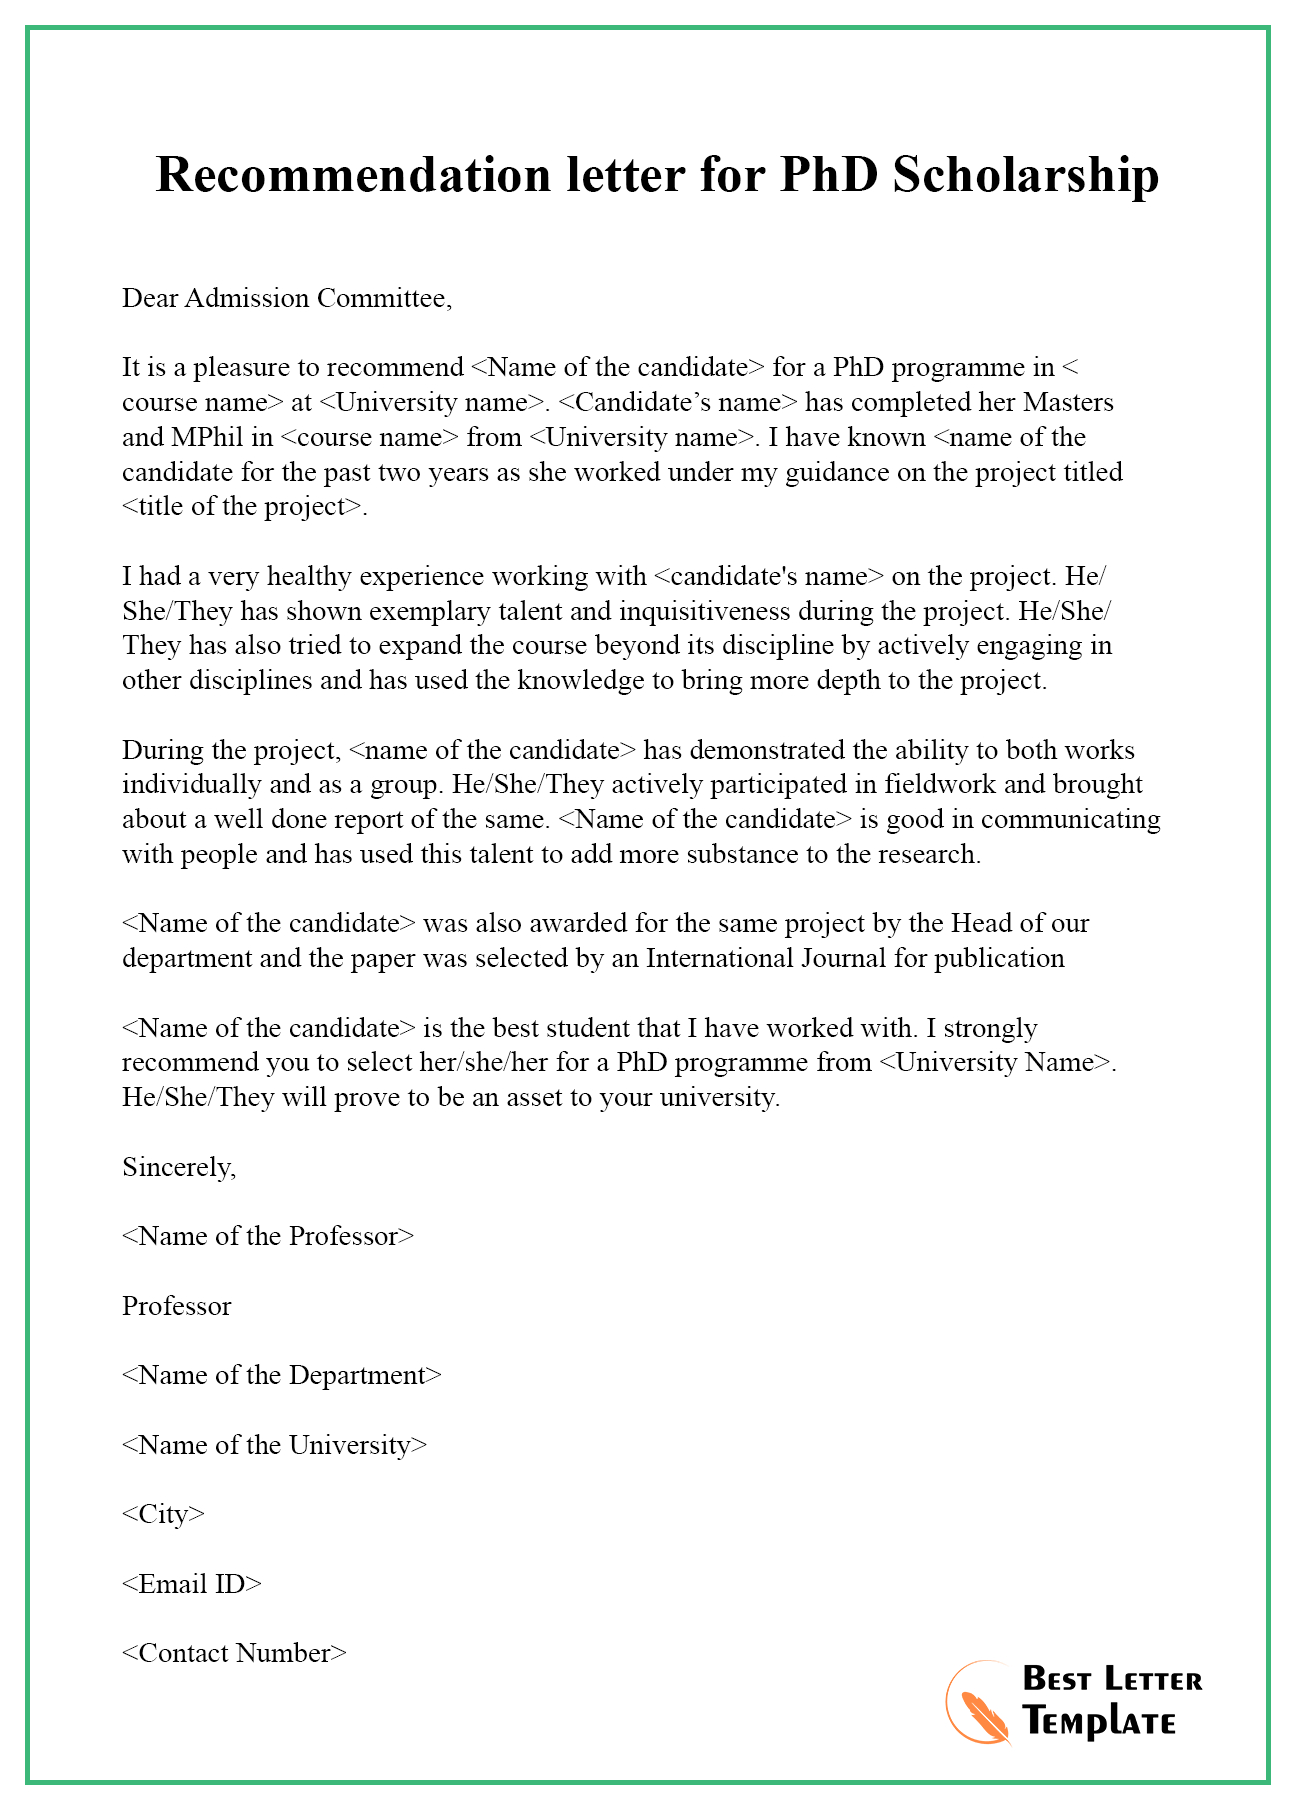 Recommendation Letter For Phd Scholarship Best Letter Template intended for size 1300 X 1806